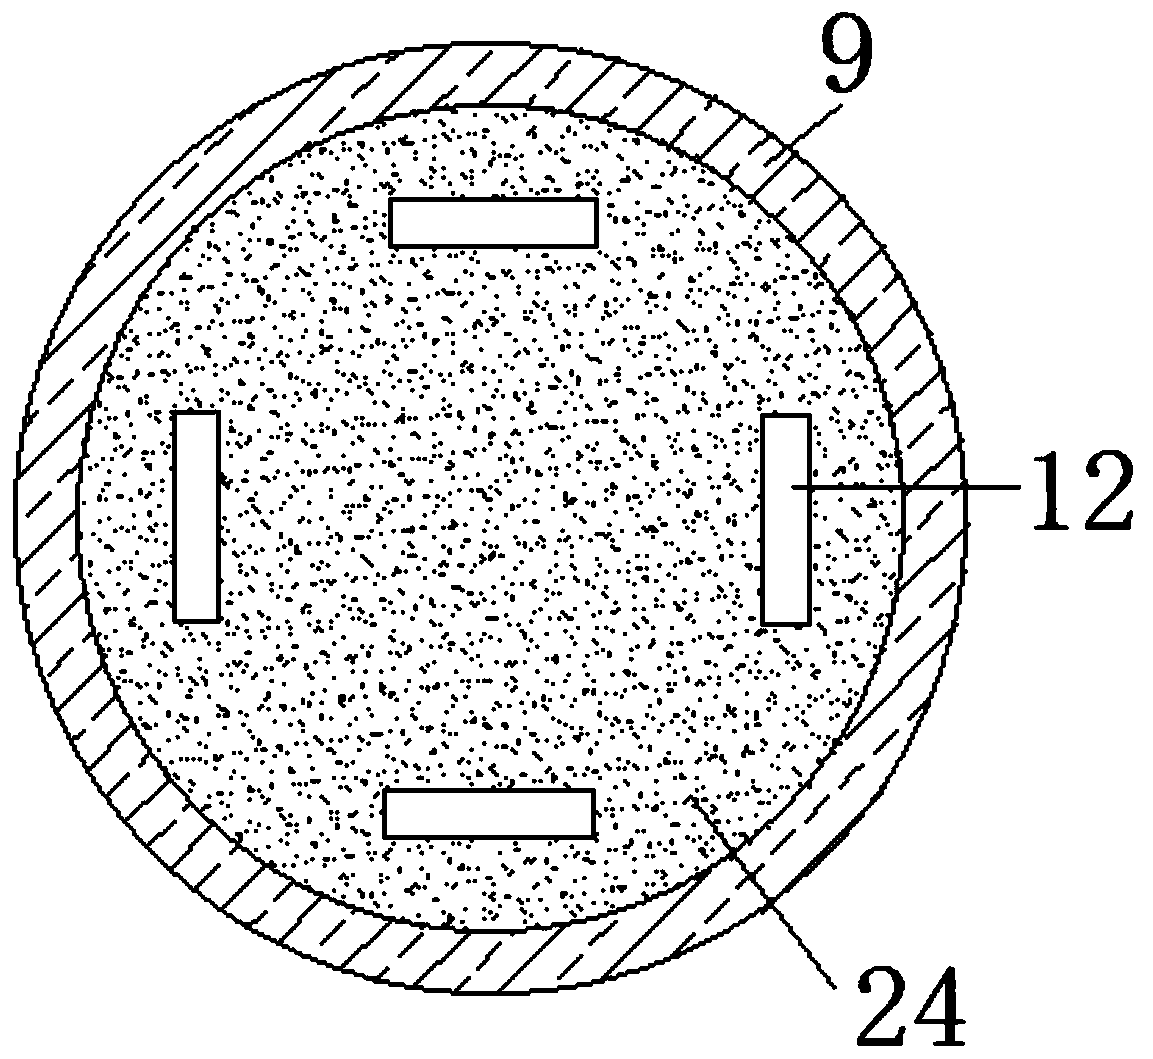 Display device convenient for dust removal used for computer hardware development